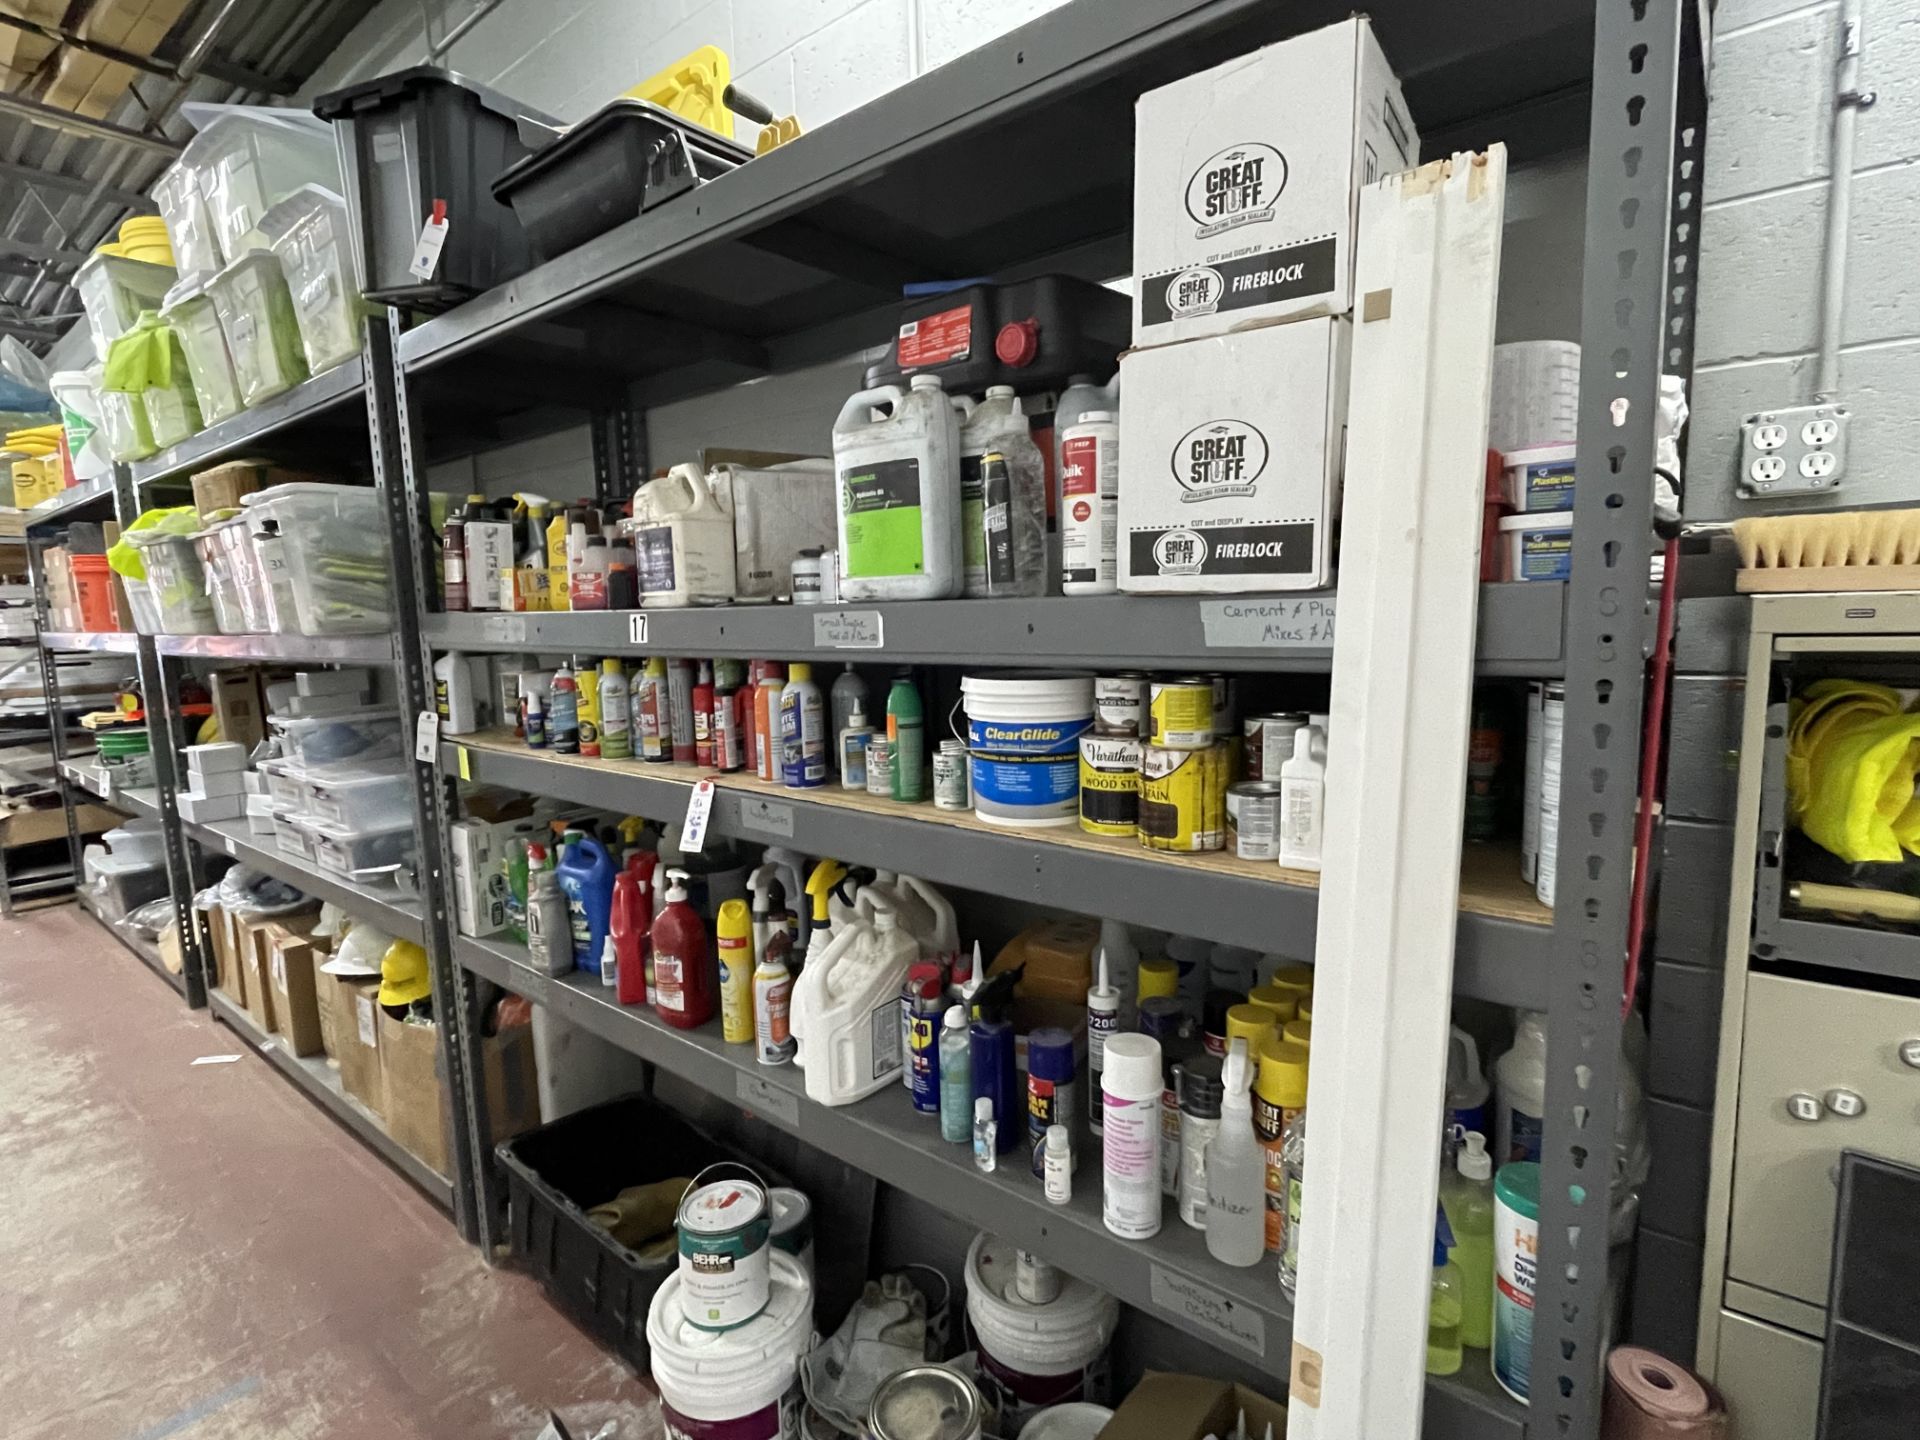 (Lot) on Shelving C/O: Greases, Antifreeze, Oil Paint, Foam Fill etc. Must take all